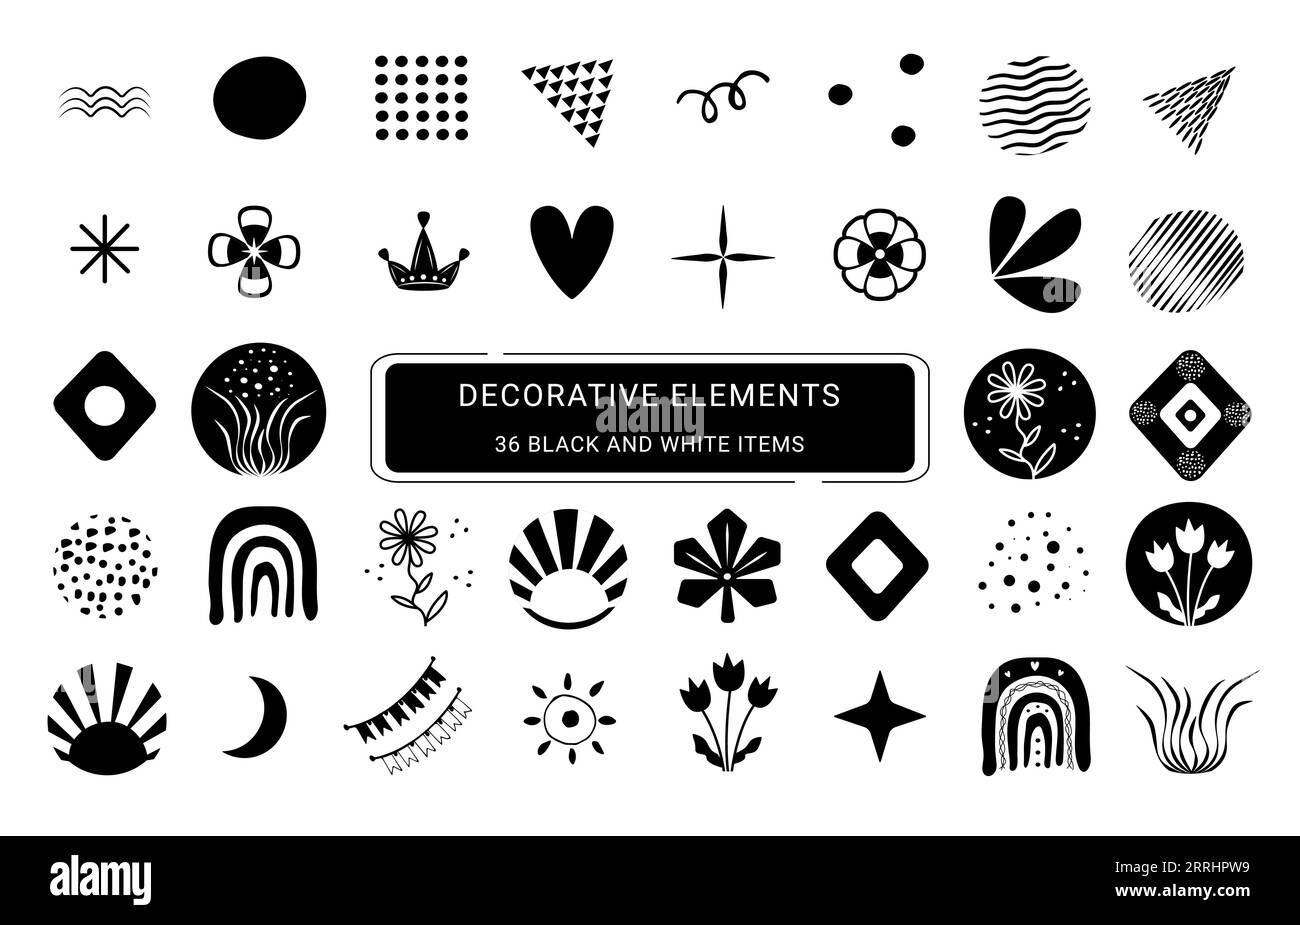 Decorative elements icon set, black and white items Stock Vector